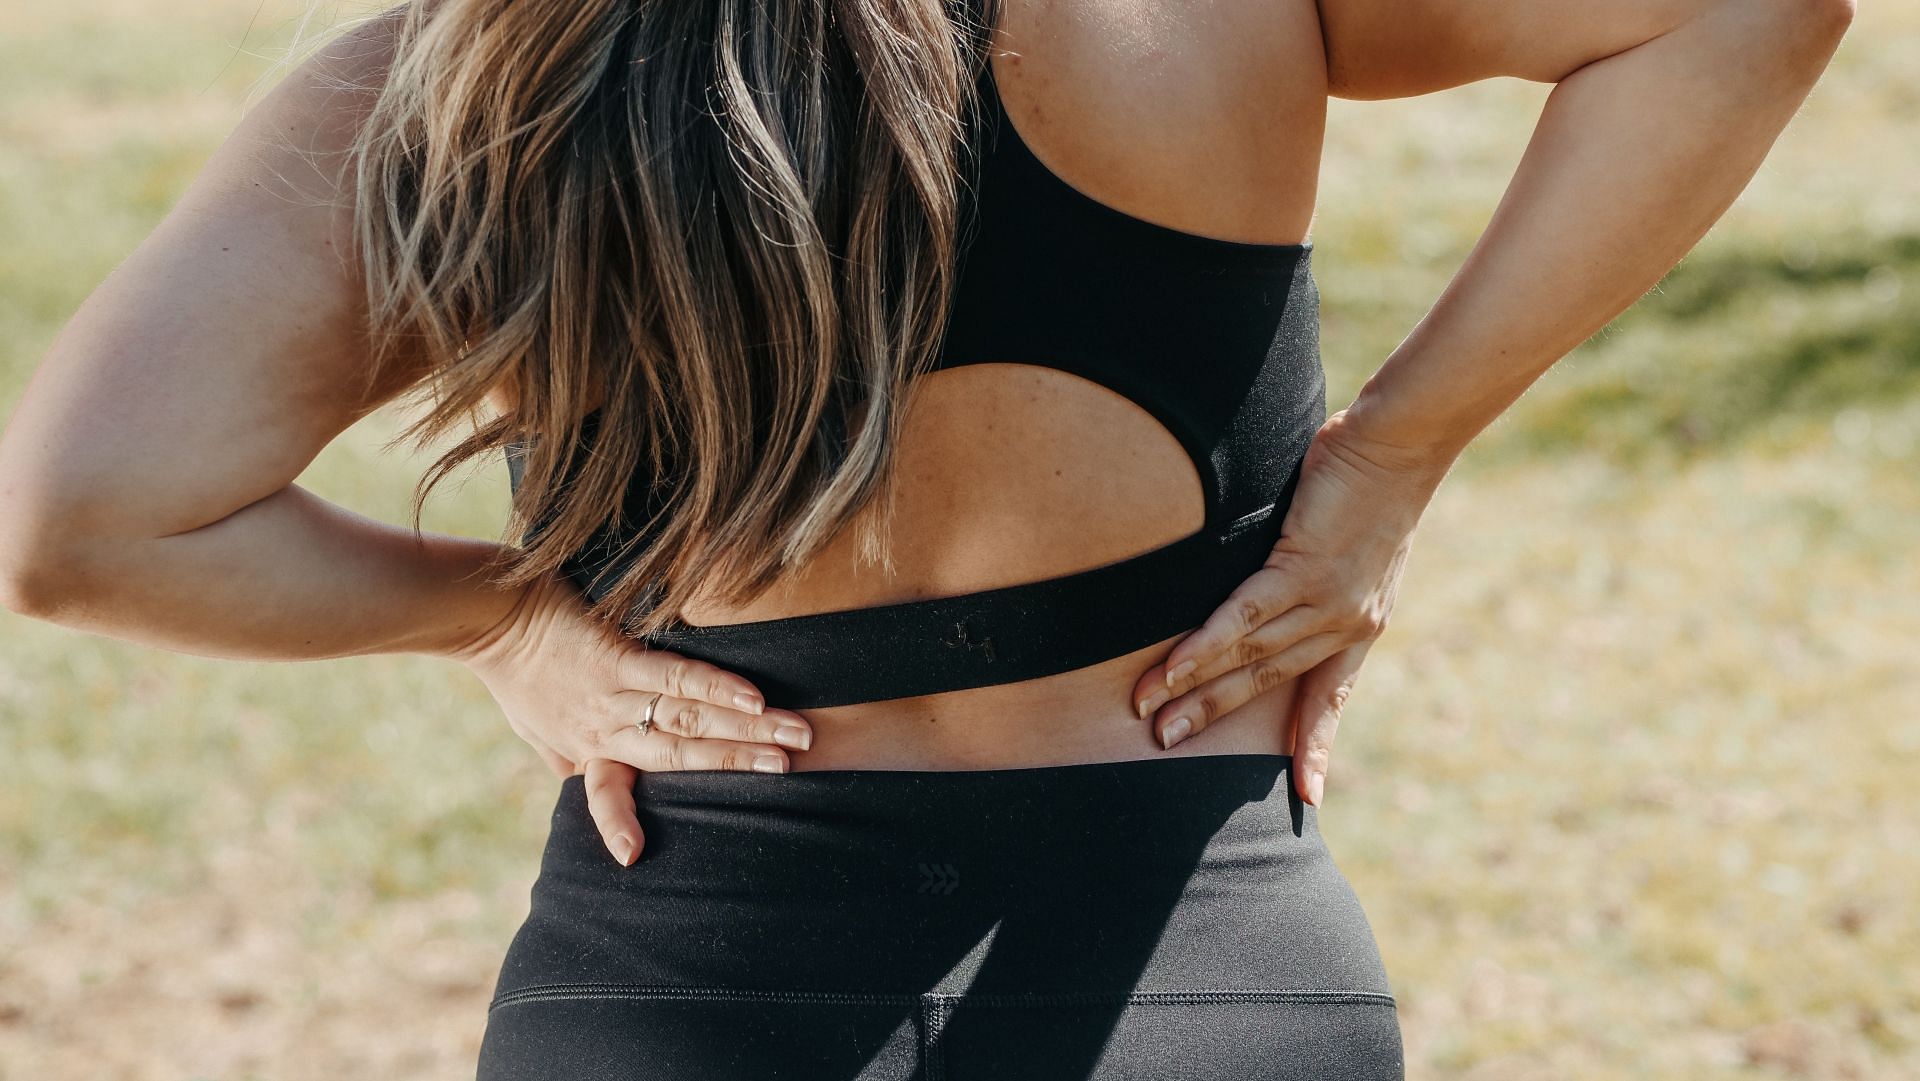 Tailbone Pain Relief With Easy Exercises